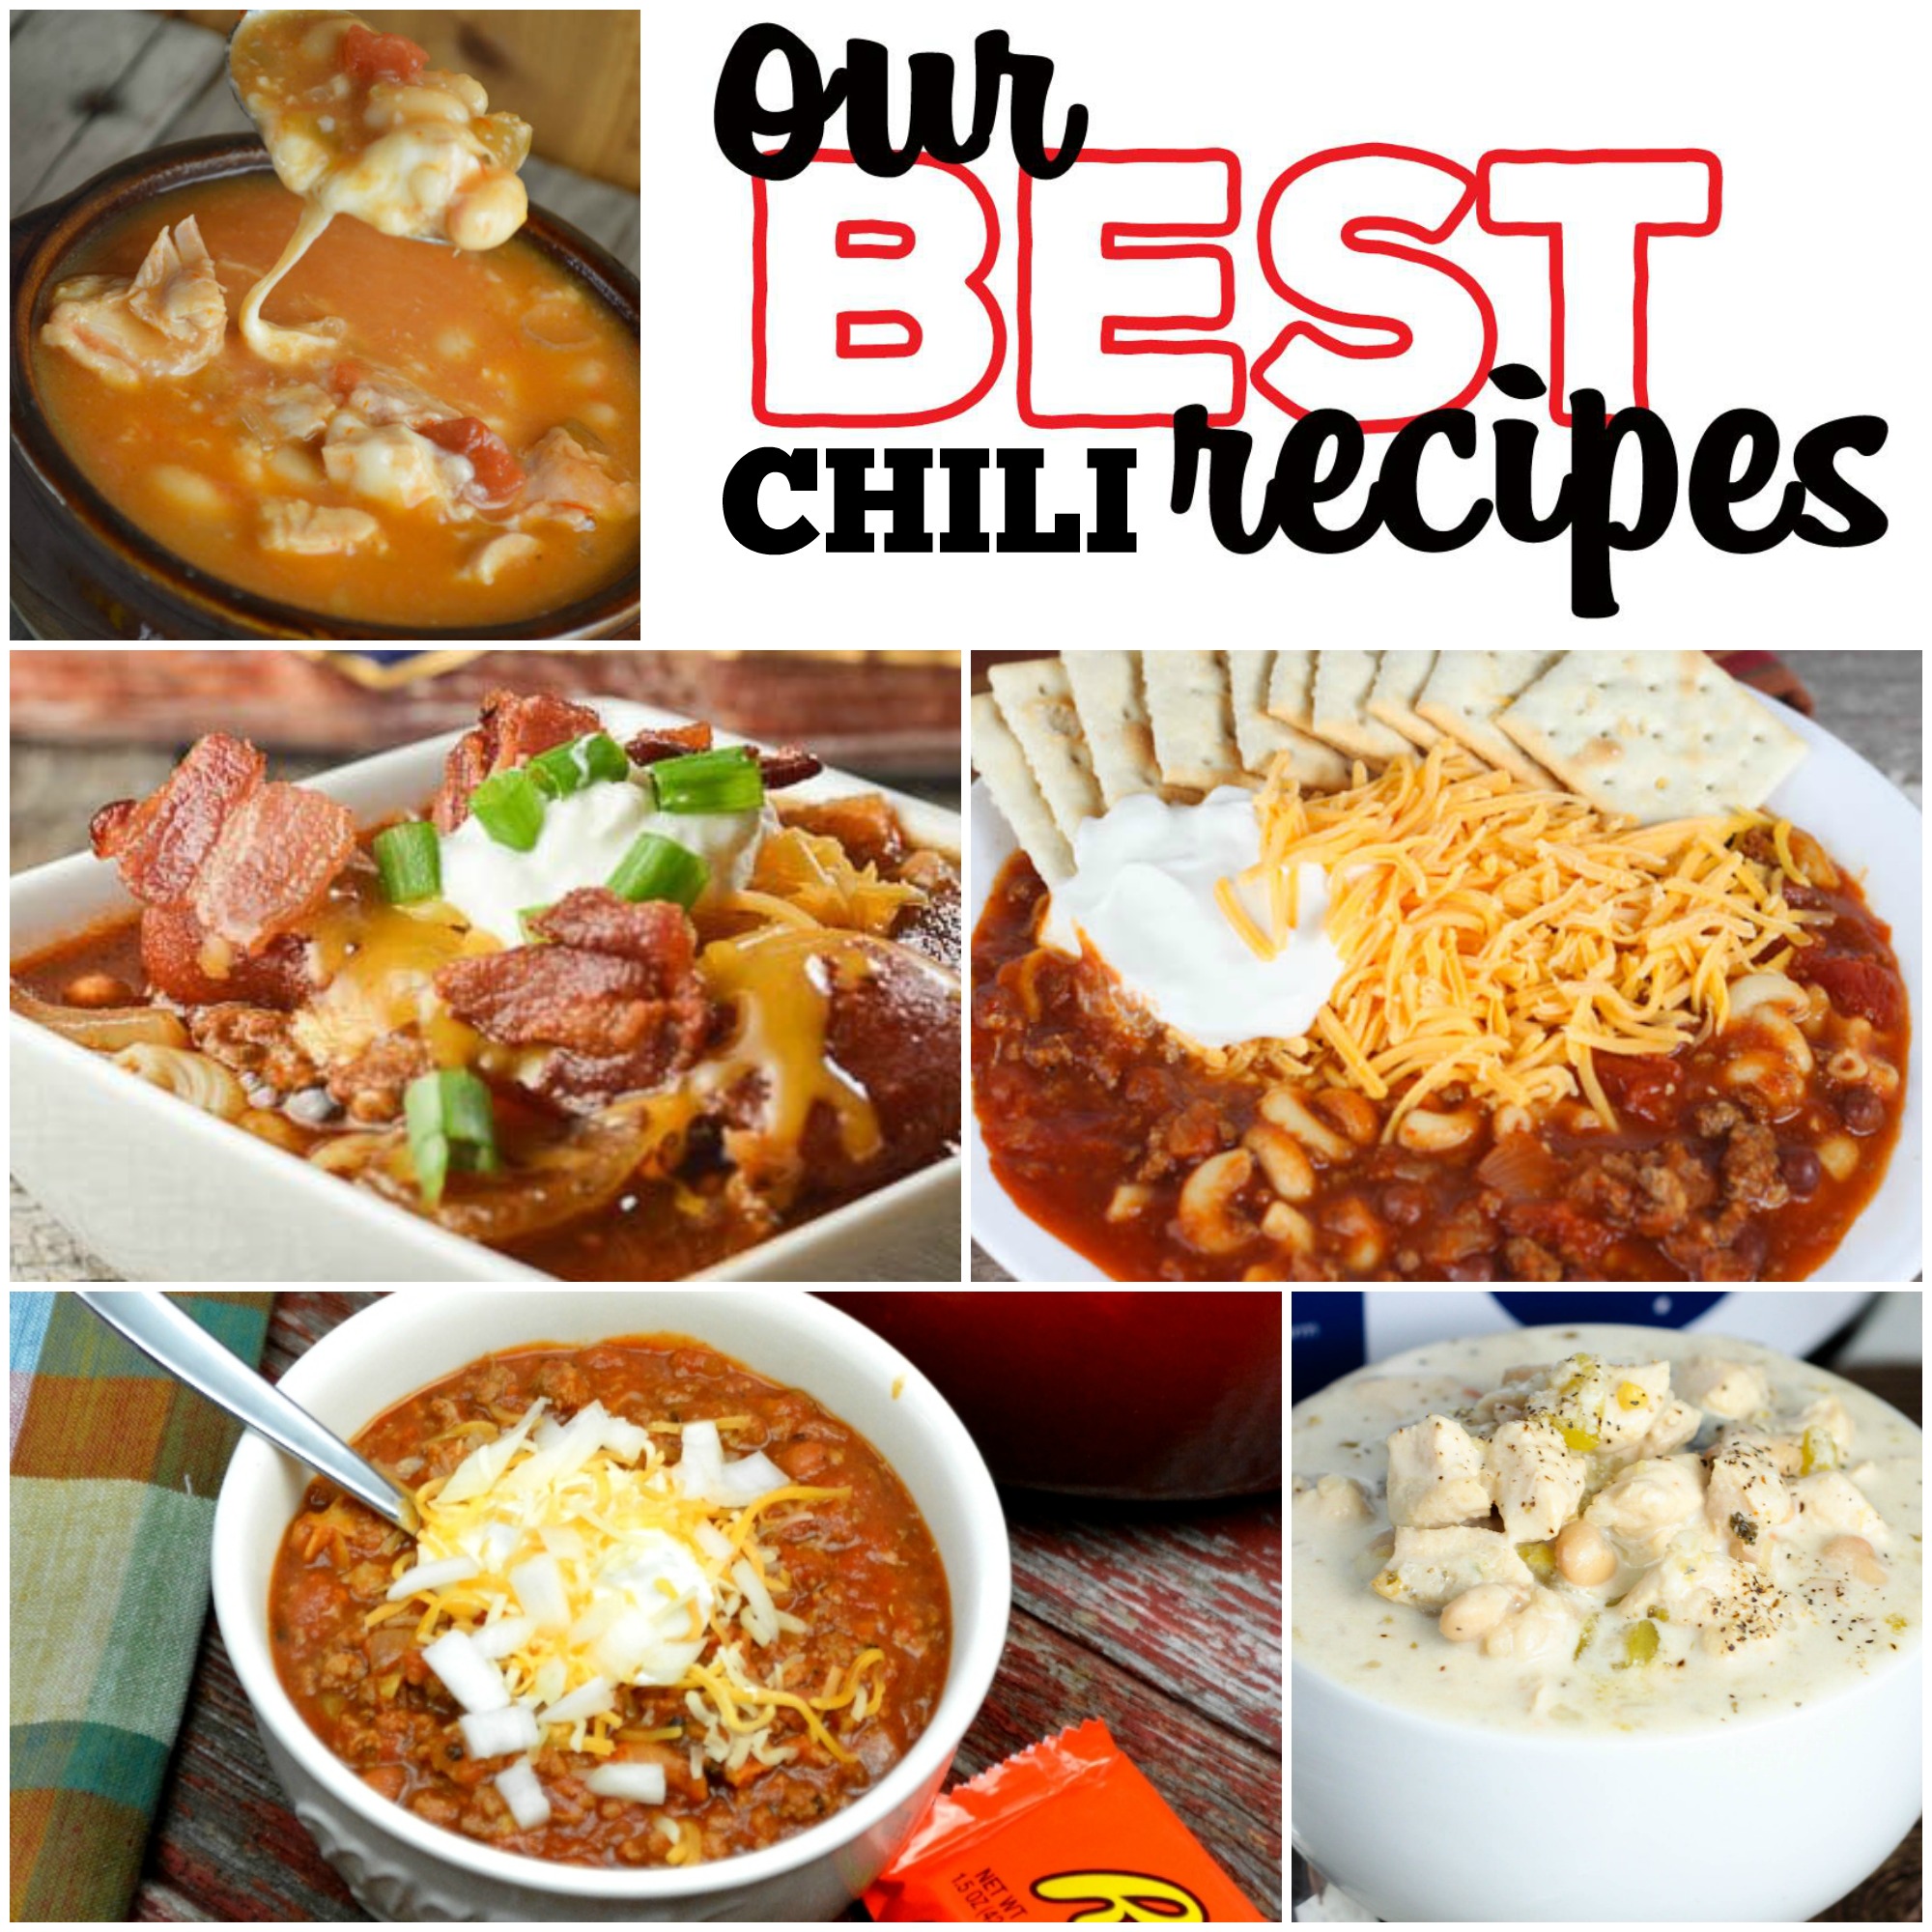 Our Best Chili Recipes